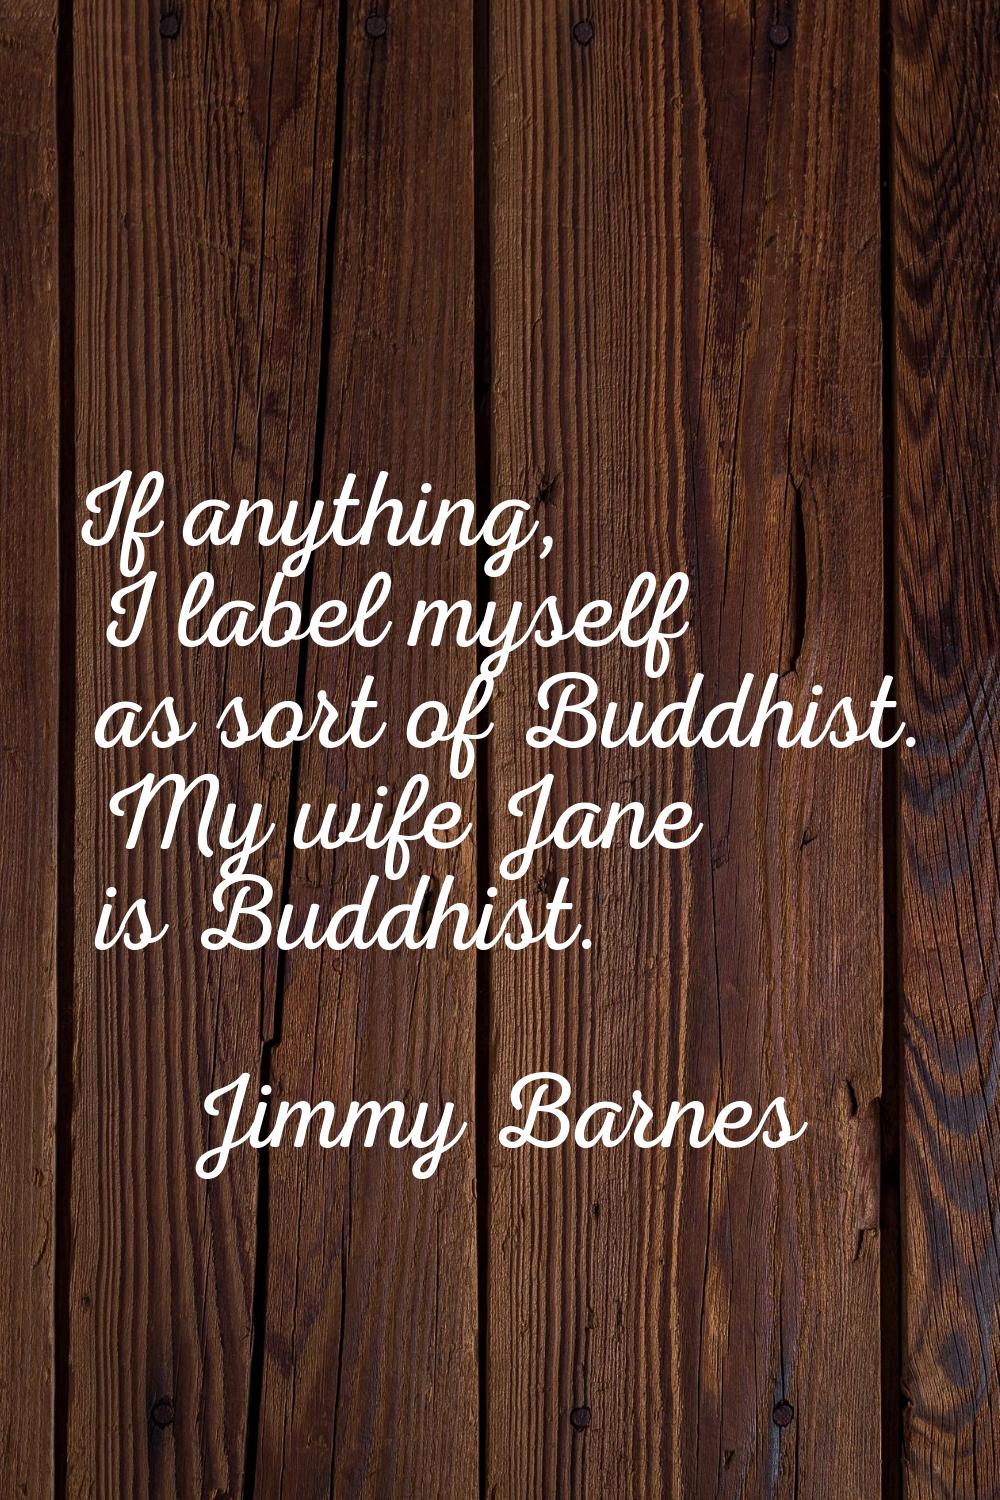 If anything, I label myself as sort of Buddhist. My wife Jane is Buddhist.